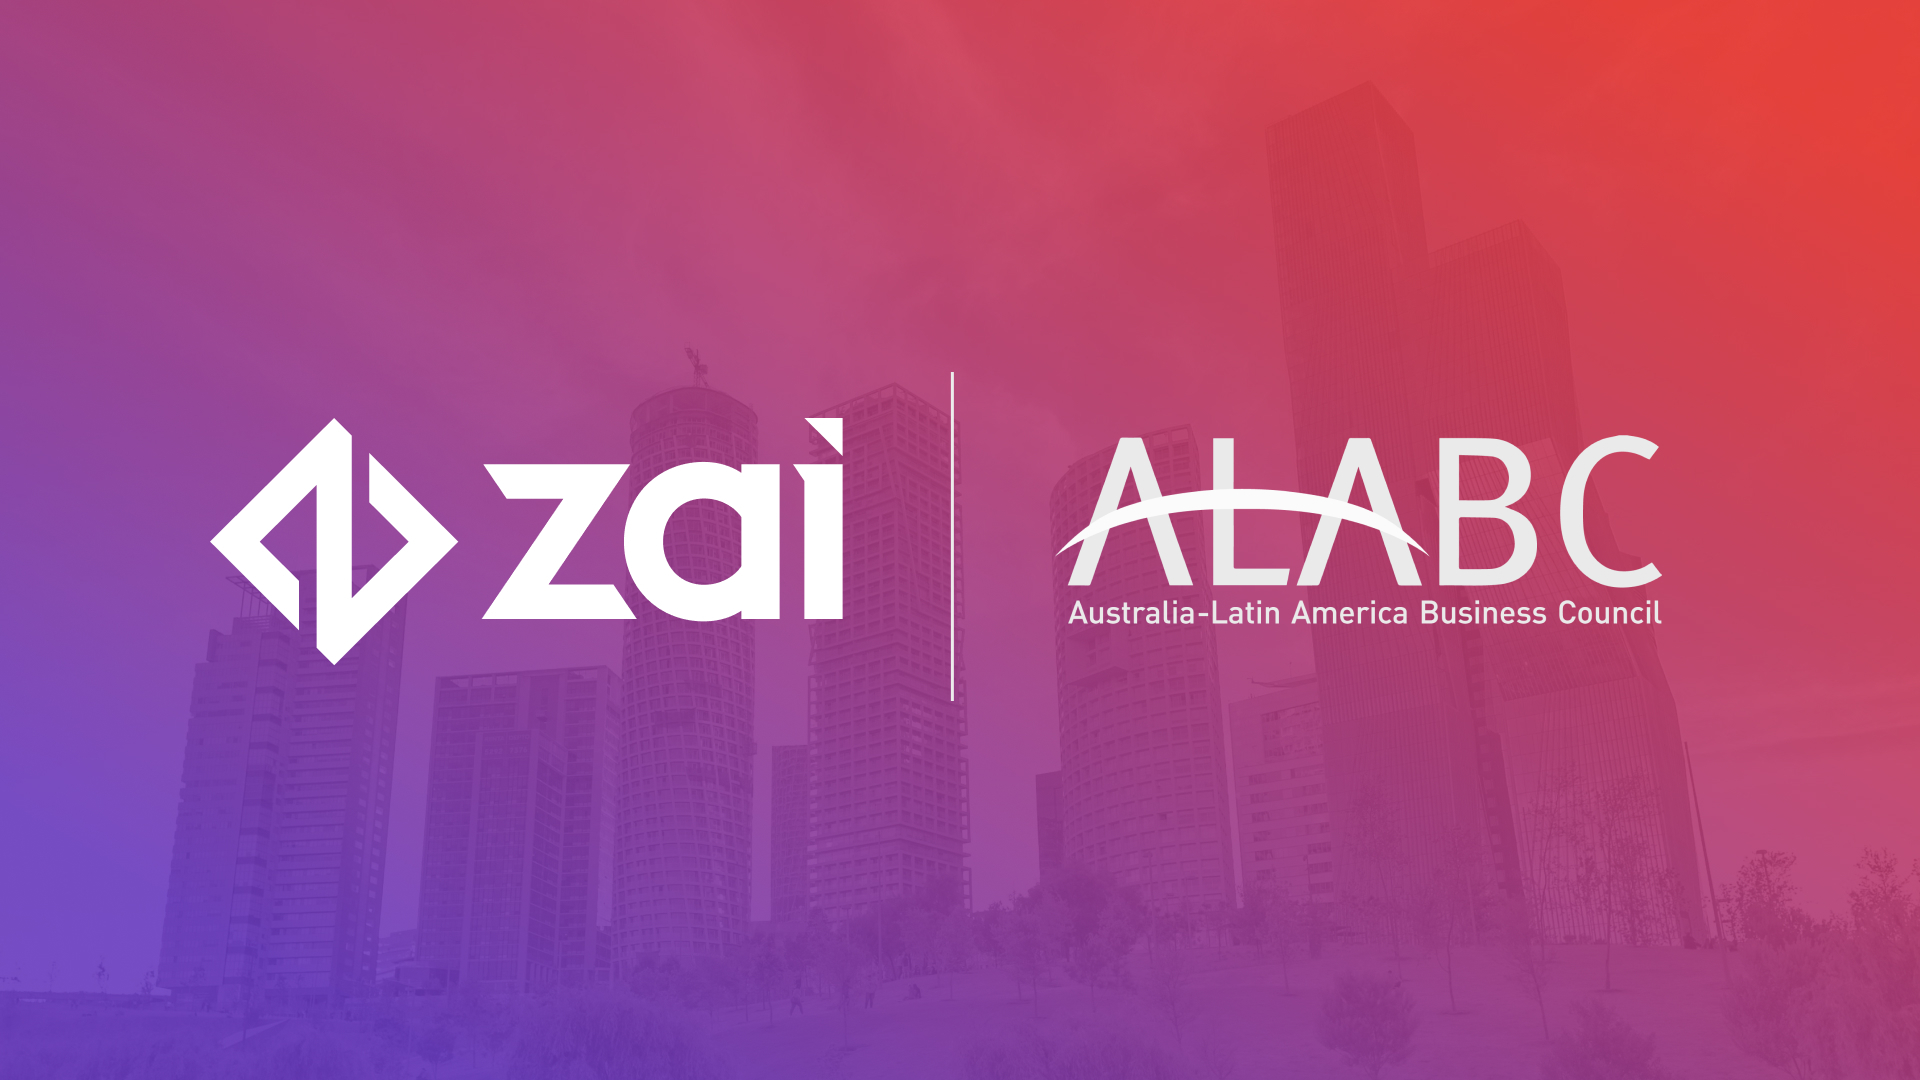 Pink and purple background with Zai and ALABC logos in white.